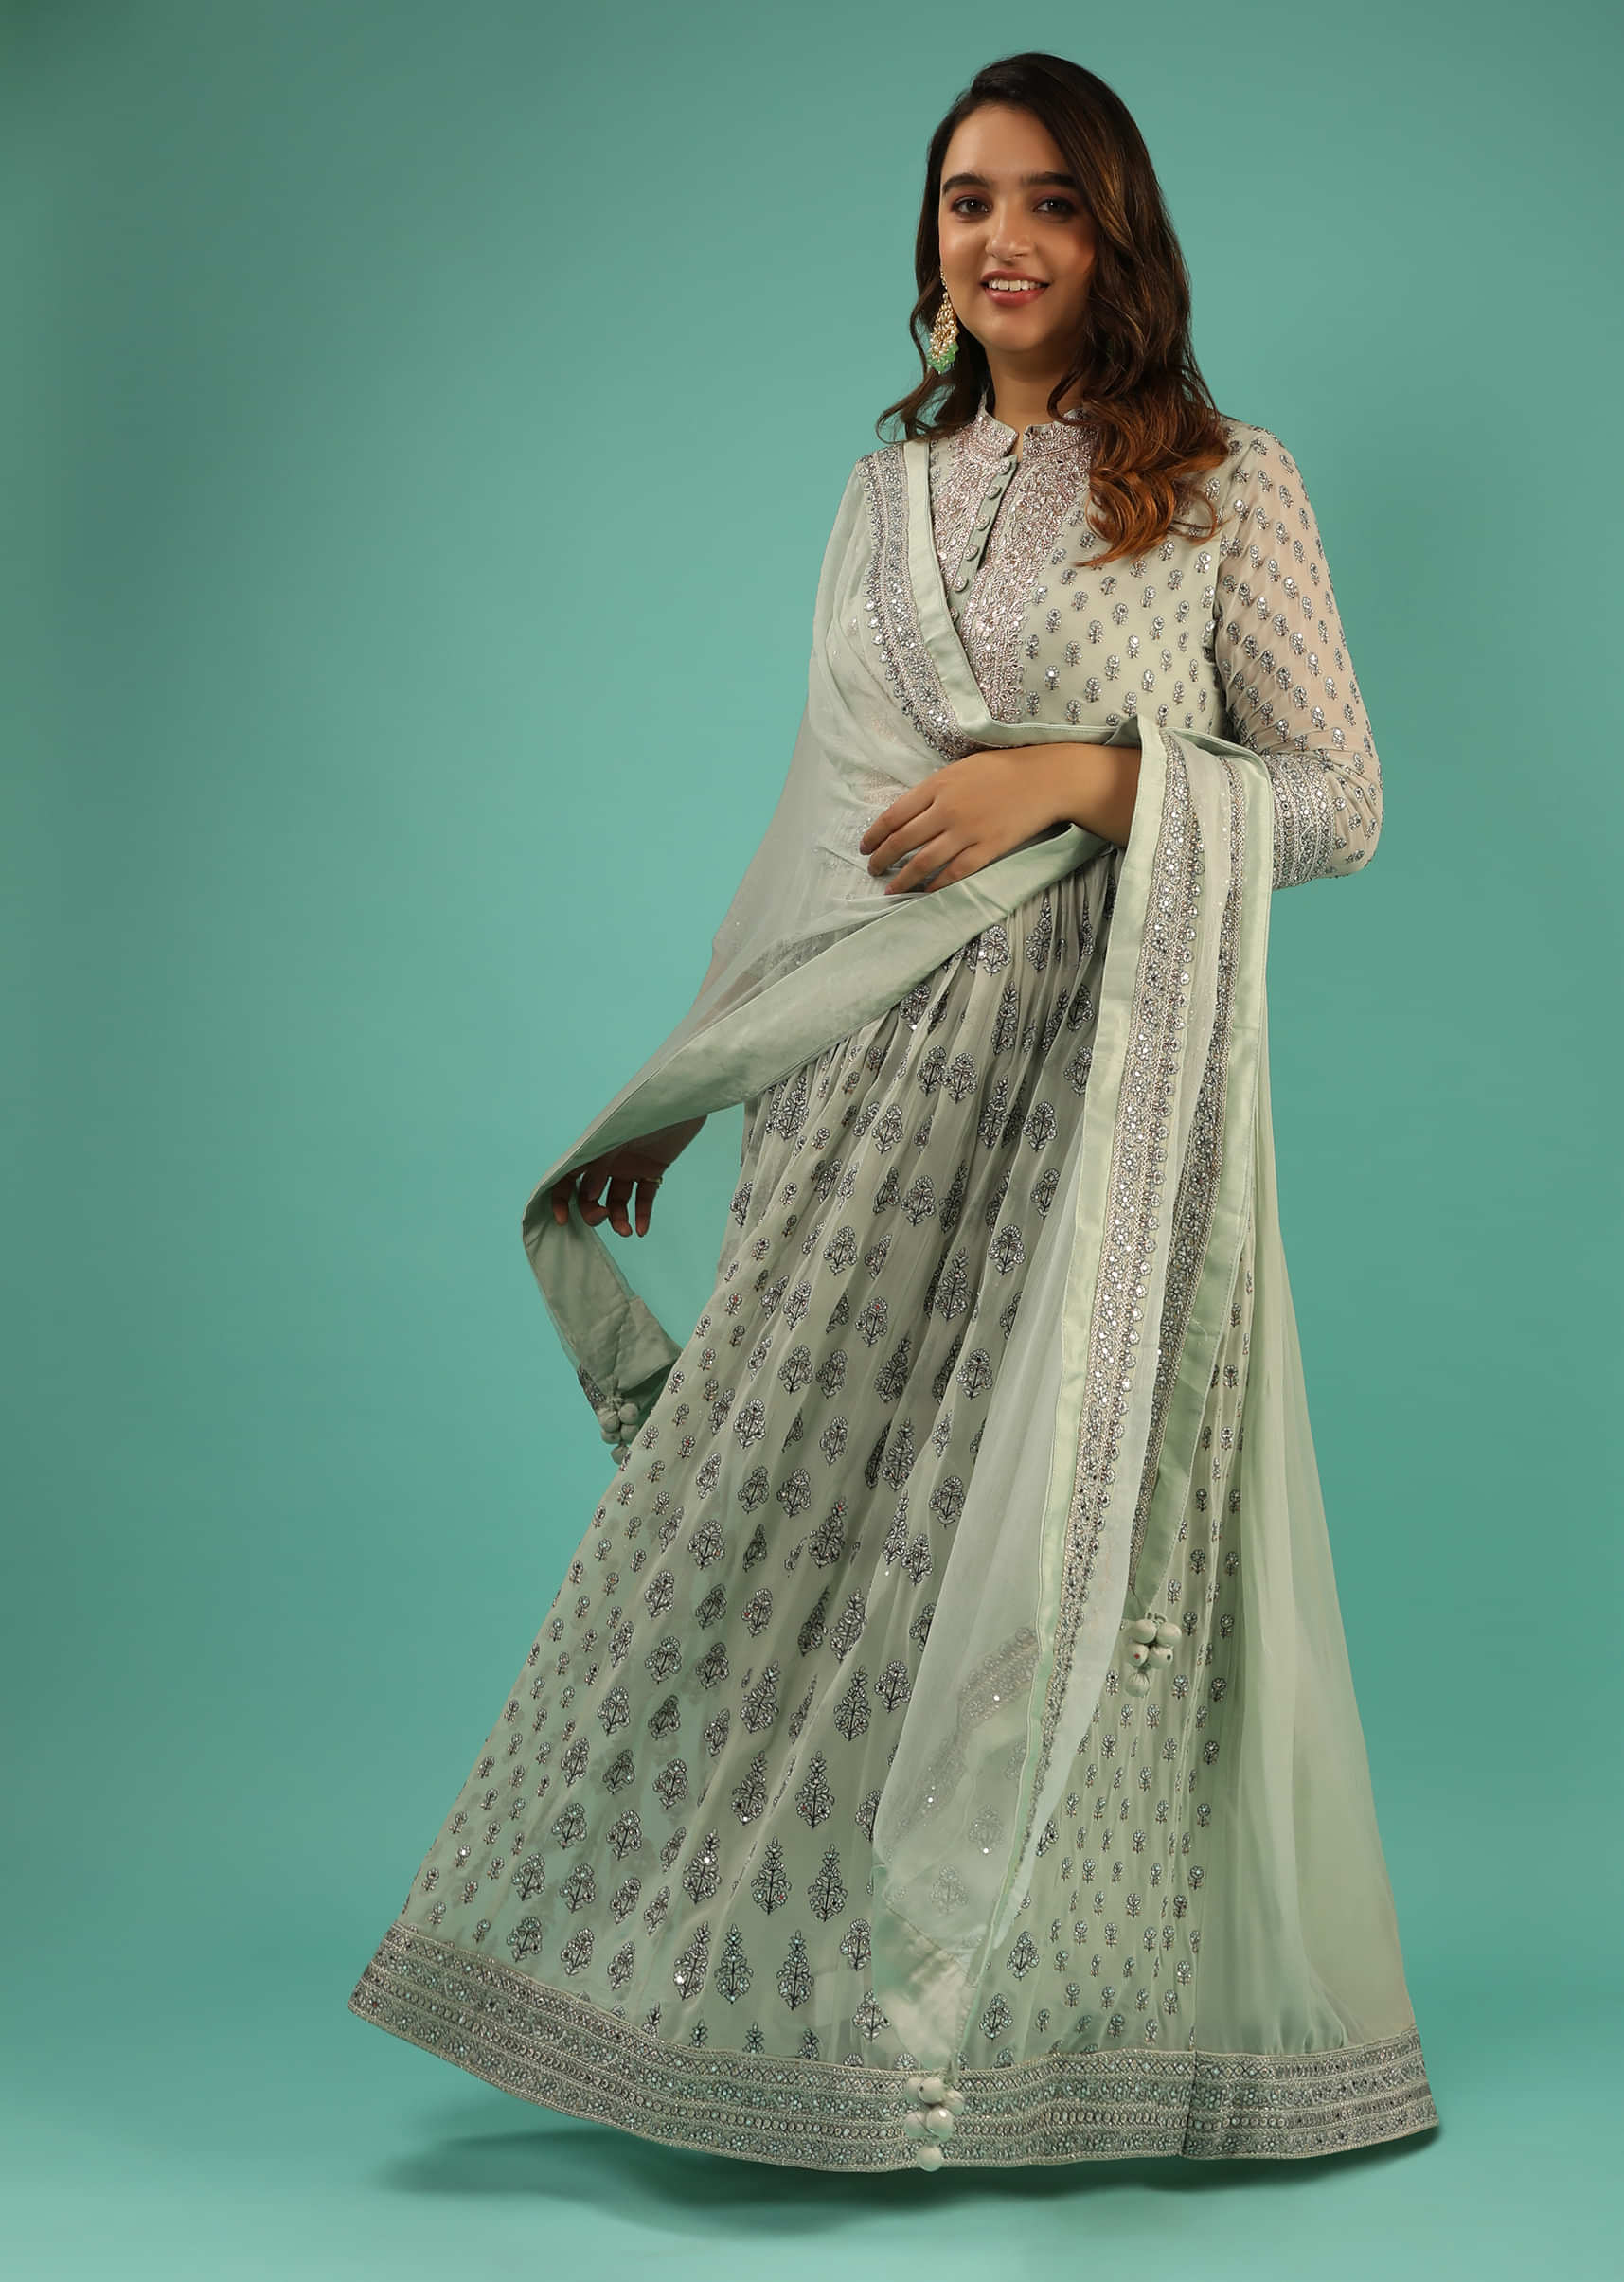 Dusty Green Anarkali Suit In Georgette With Resham And Mirror Embroidered Floral Buttis And Chiffon Dupatta  